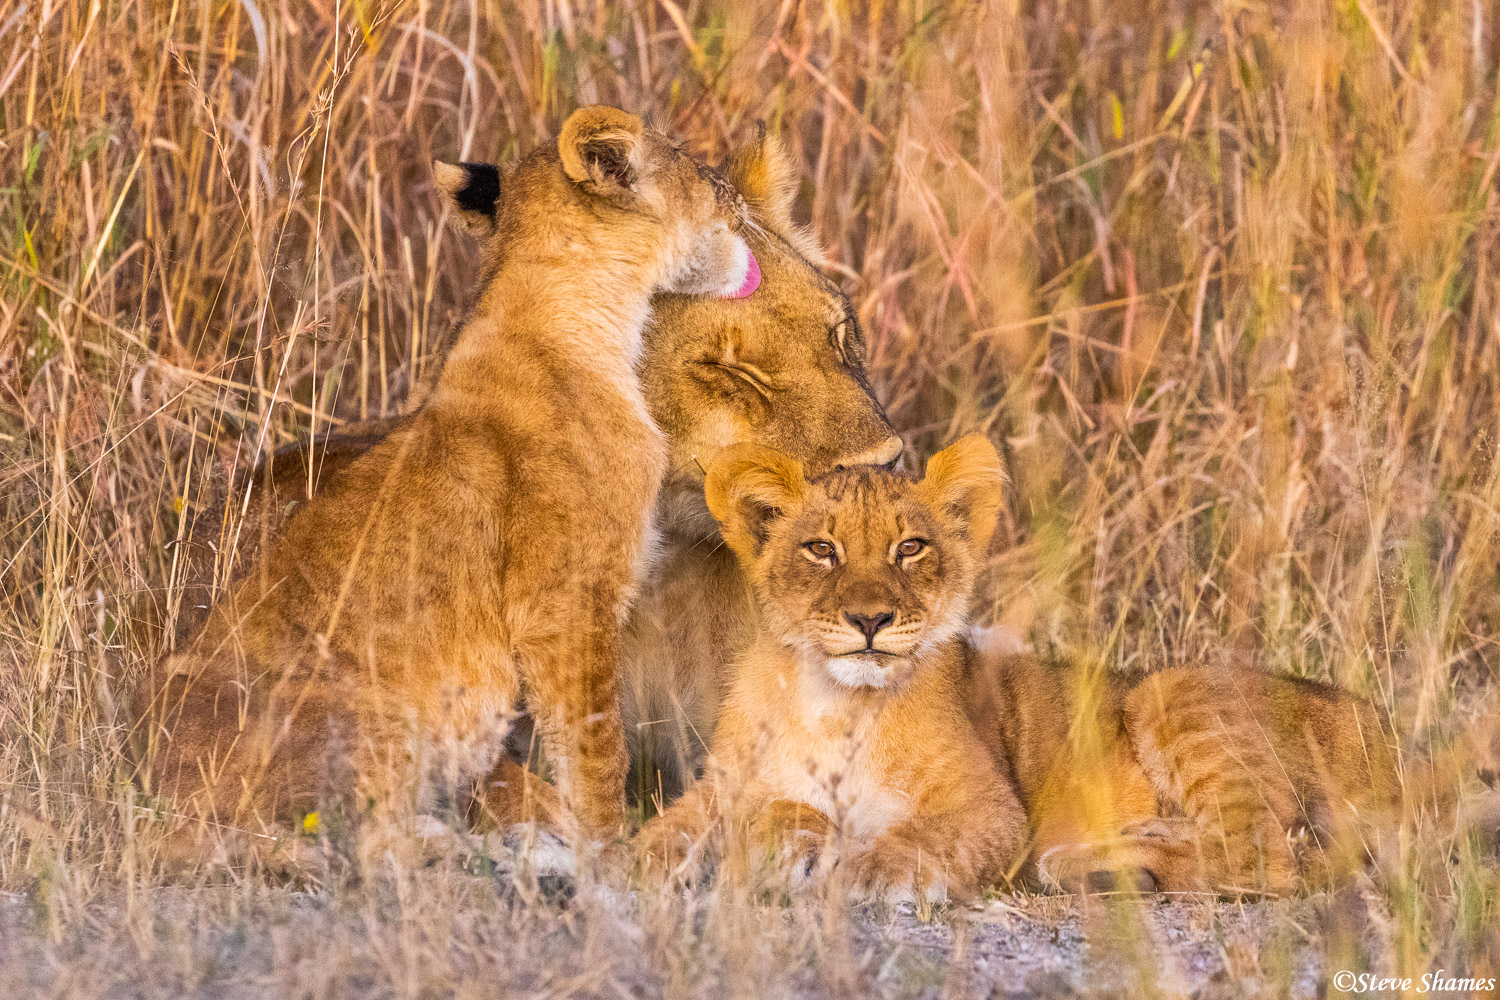 A nice little Chobe lion family, with mom getting a licking from a cub.